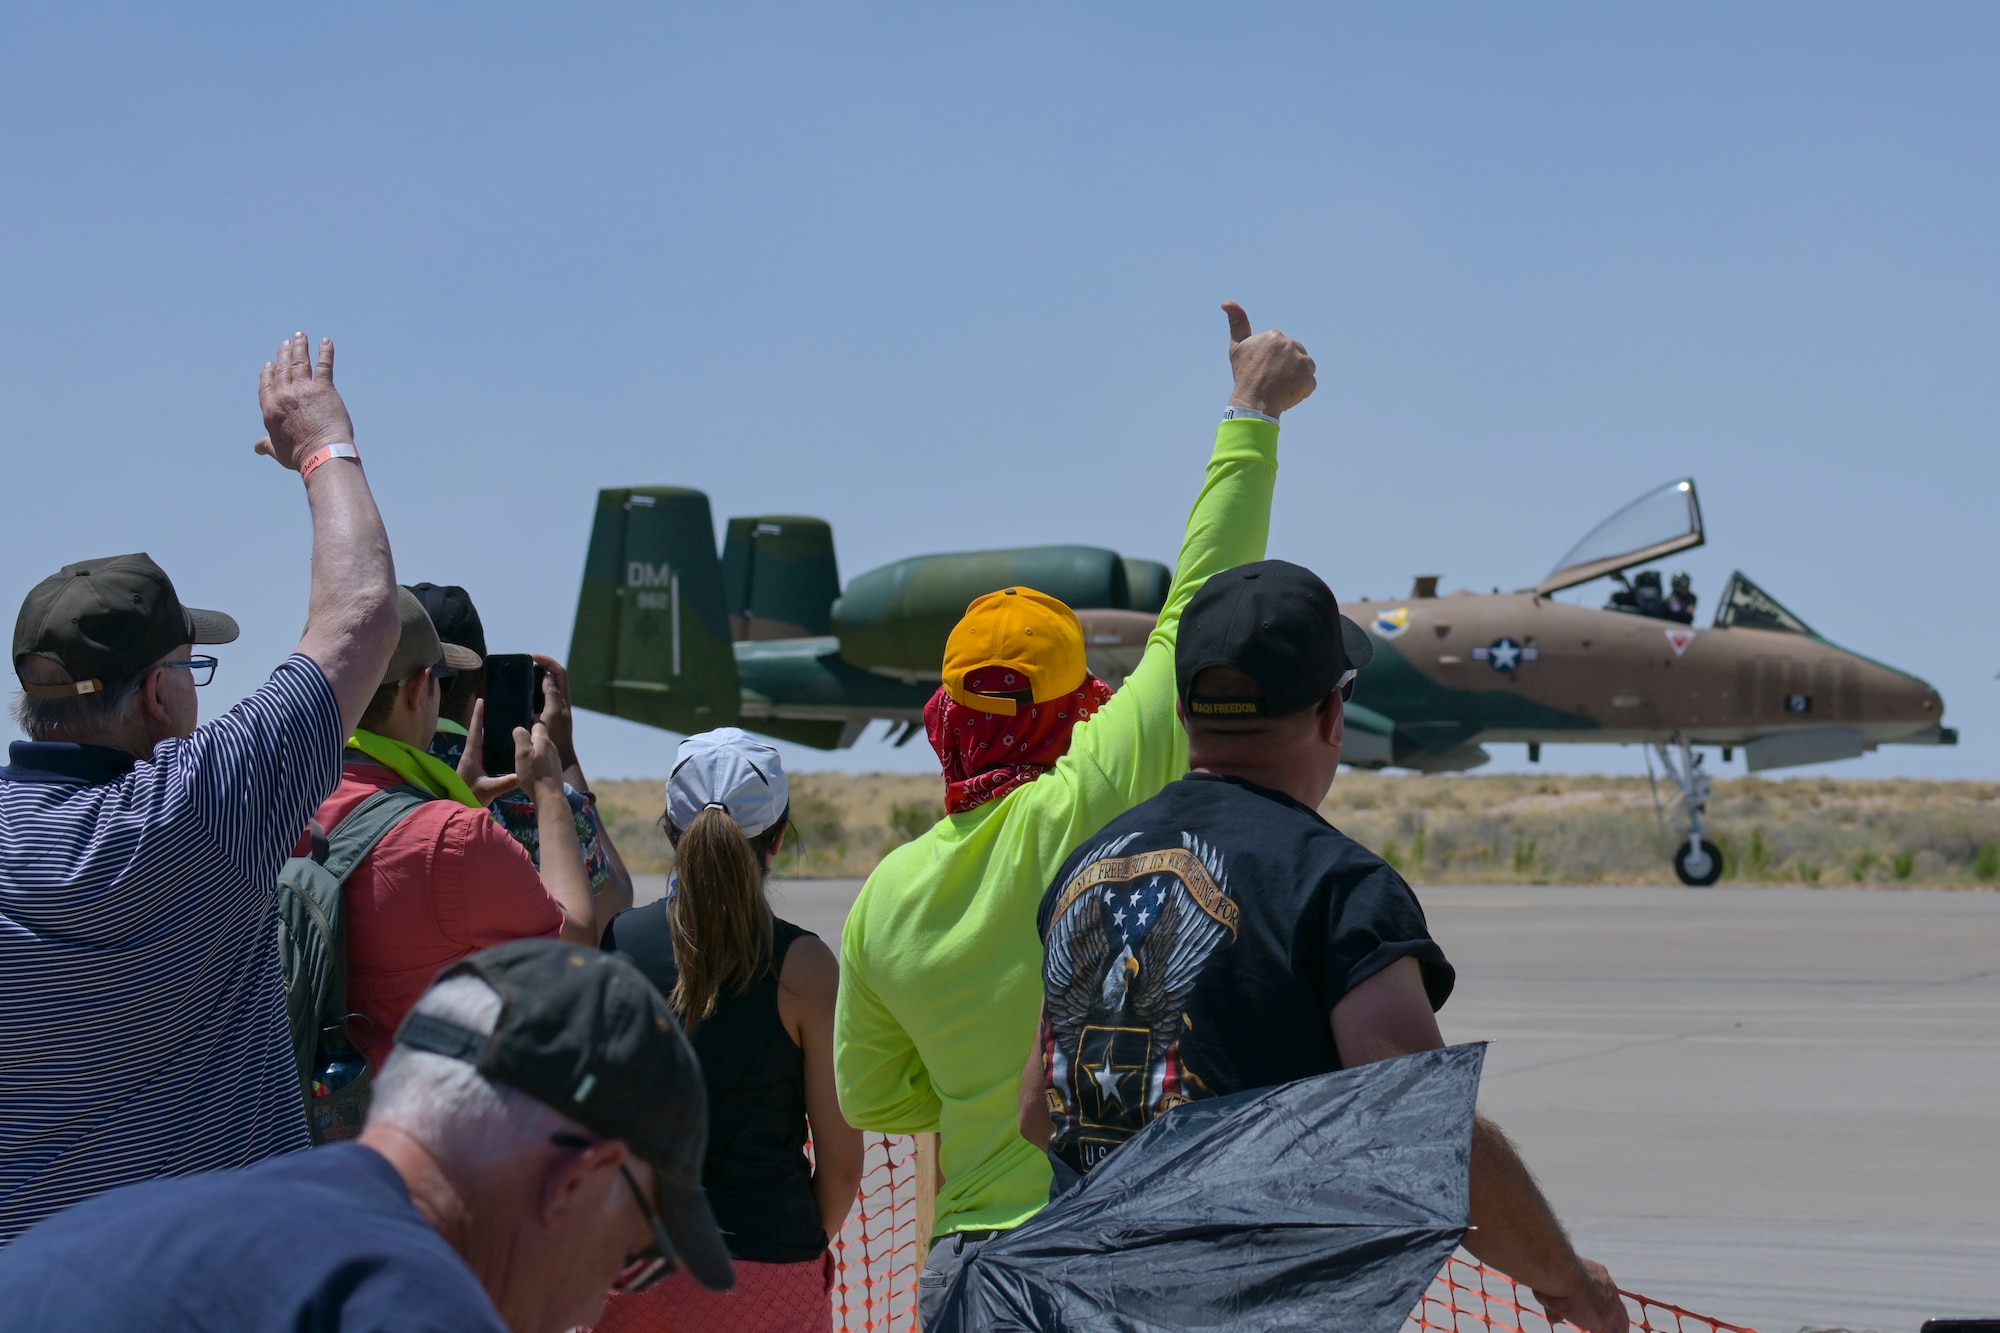 Spectators cheer as the A-10C Thunderbolt II, from Davis-Monthan Air Force Base, Arizona, taxis during the 2022 Holloman Legacy of Liberty Air Show and Open House May 7, 2022, Holloman Air Force Base, New Mexico. The A-10C Thunderbolt II Demonstration Team performed during the event showcasing its power and capabilities. (U.S. Air Force photo by Airman 1st Class Antonio Salfran)